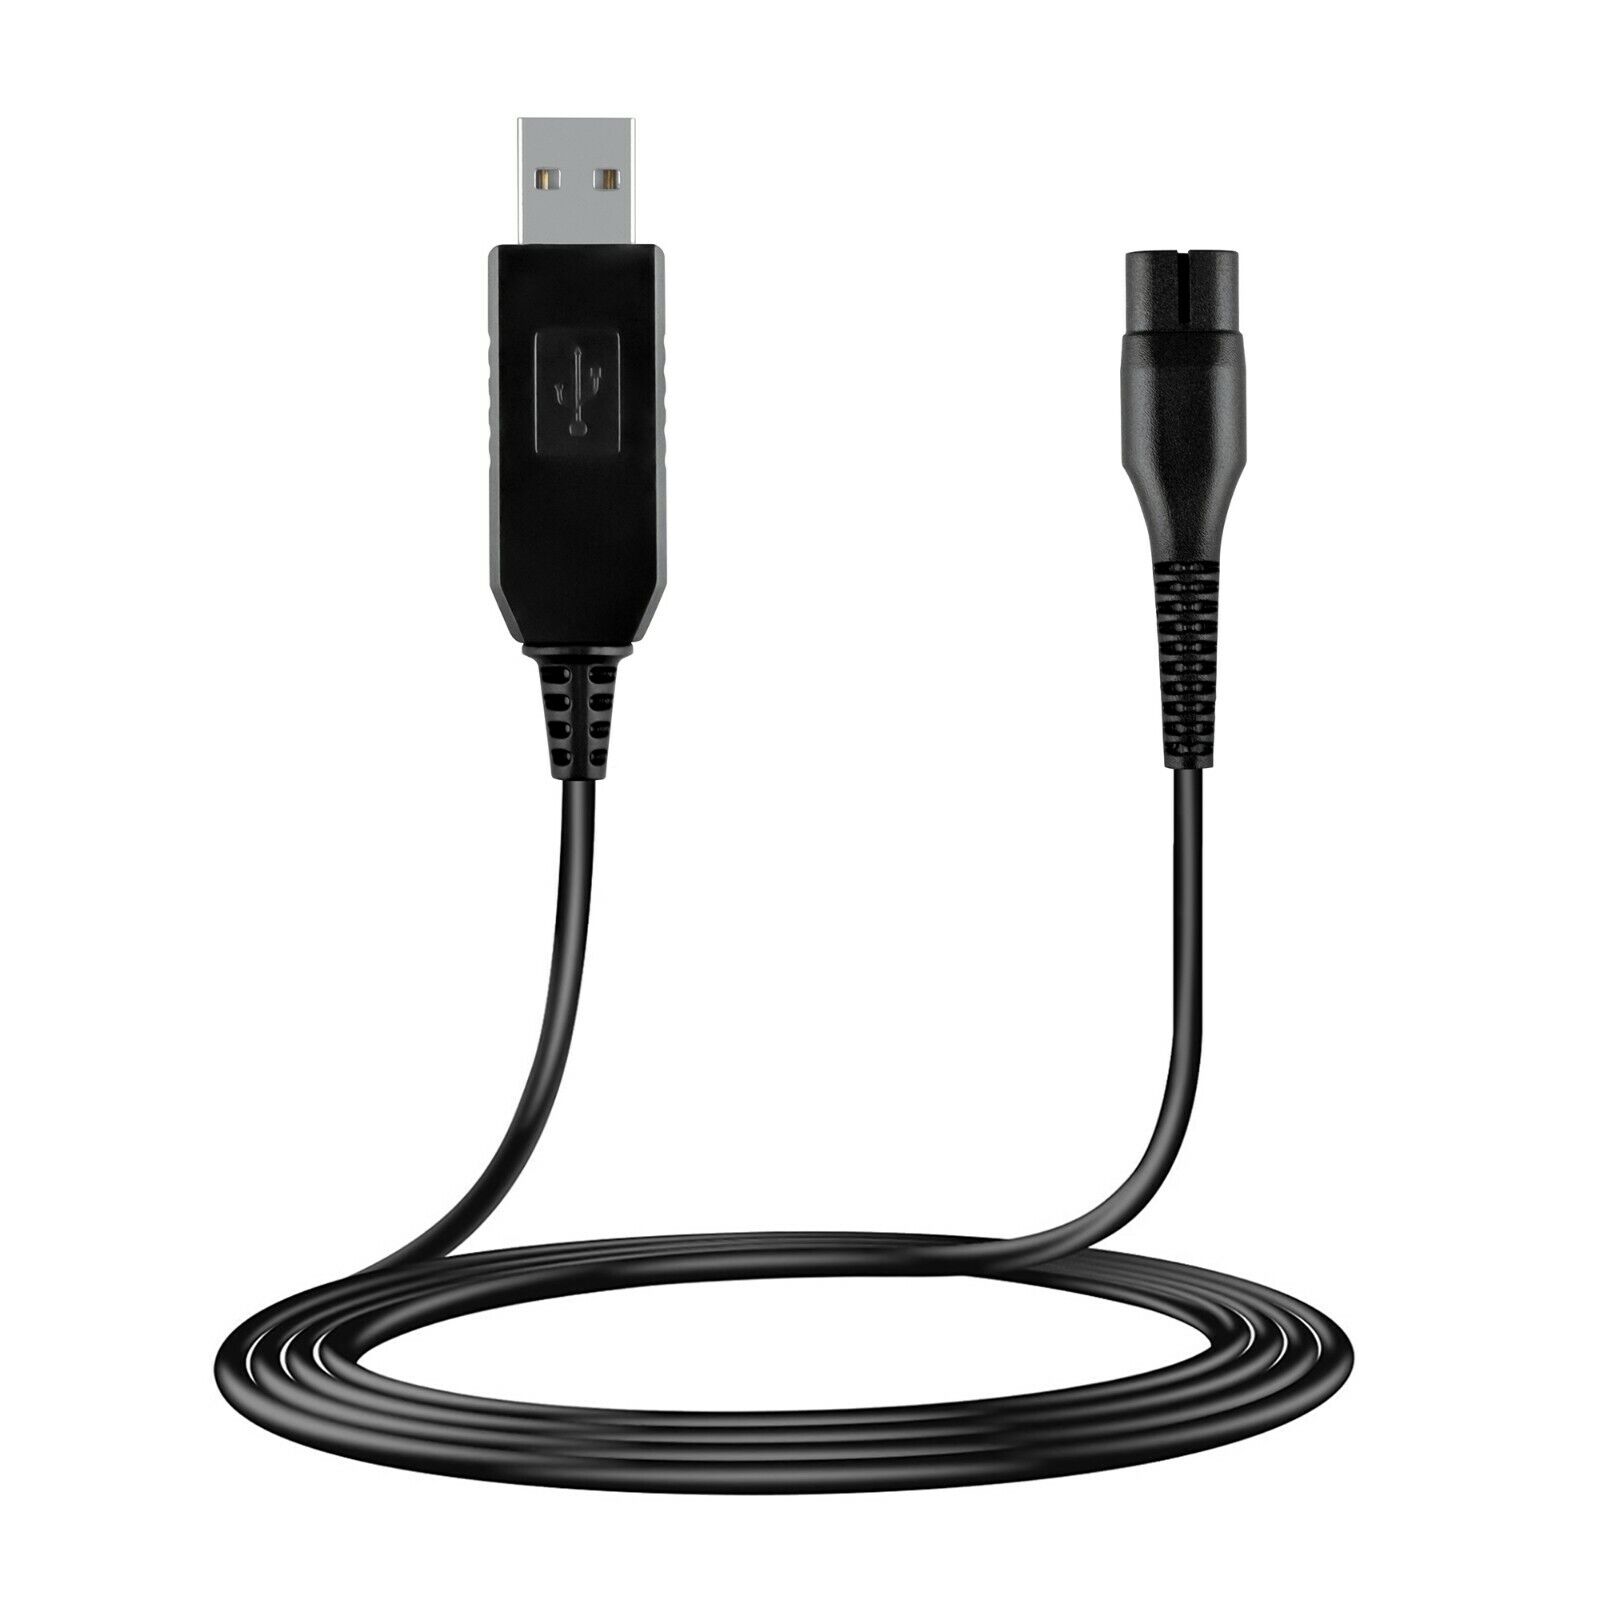 Pkpower USB Power Cord Cable For RQ331 Max 70% OFF Shaver RQ33 Philips NEW before selling ☆ RQ330